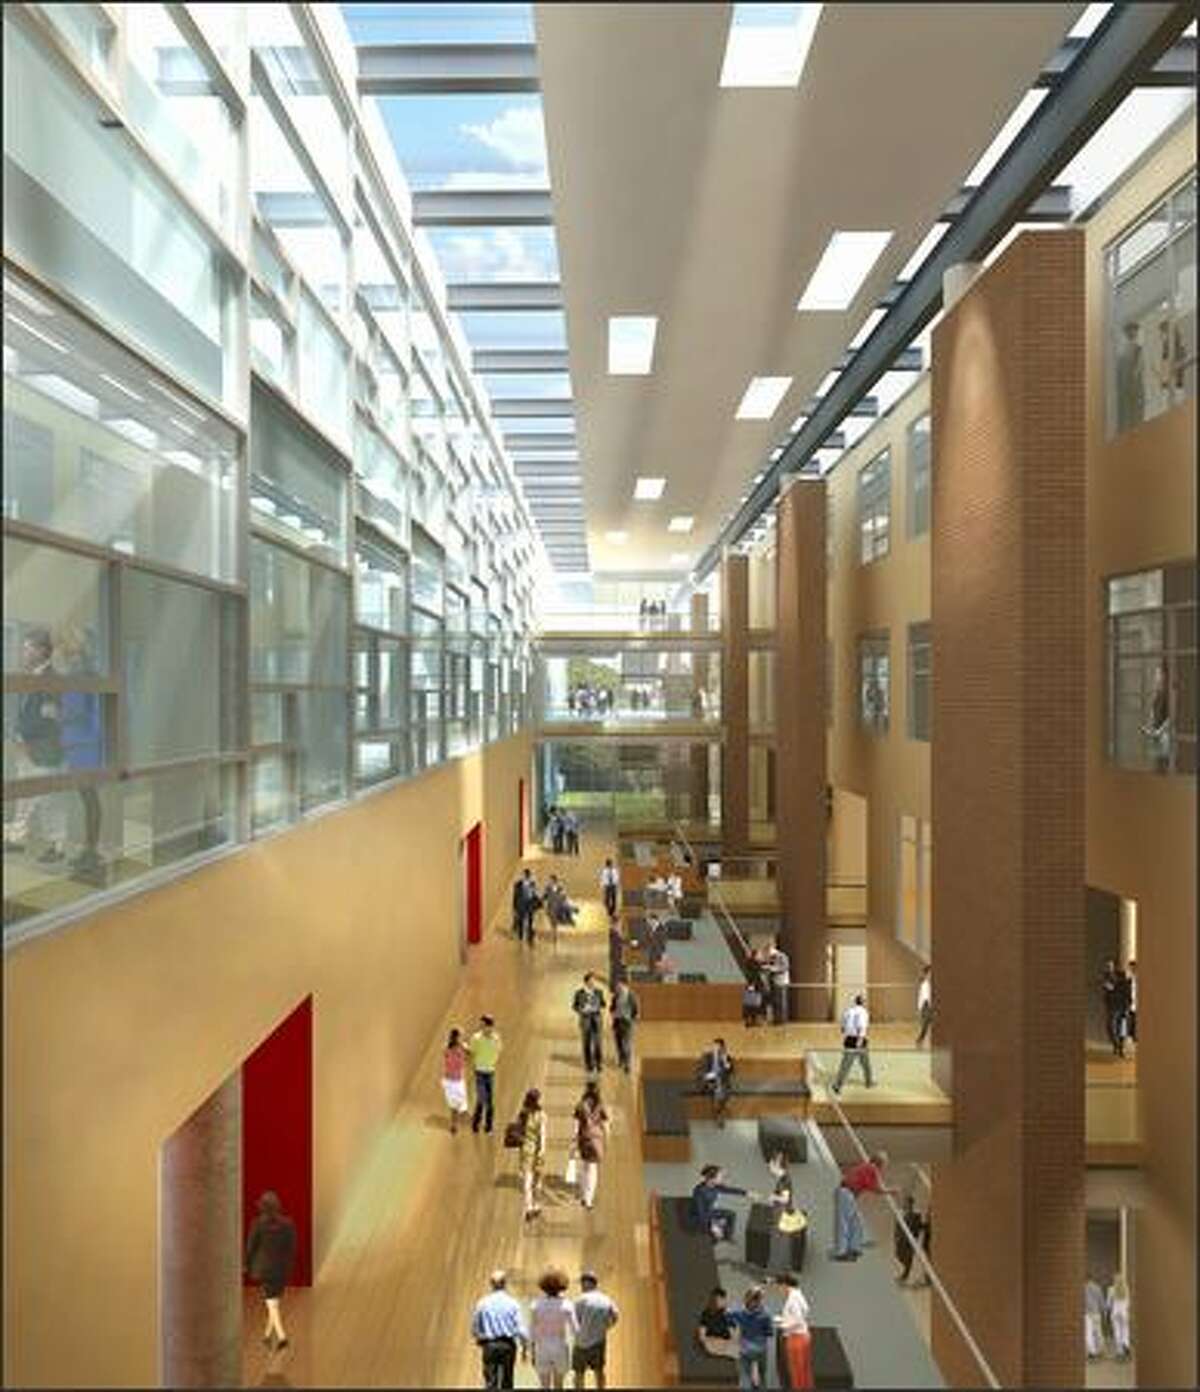 This interior rendering shows some of the common space in the atrium between the two new buildings. (Studio 216 rendering)